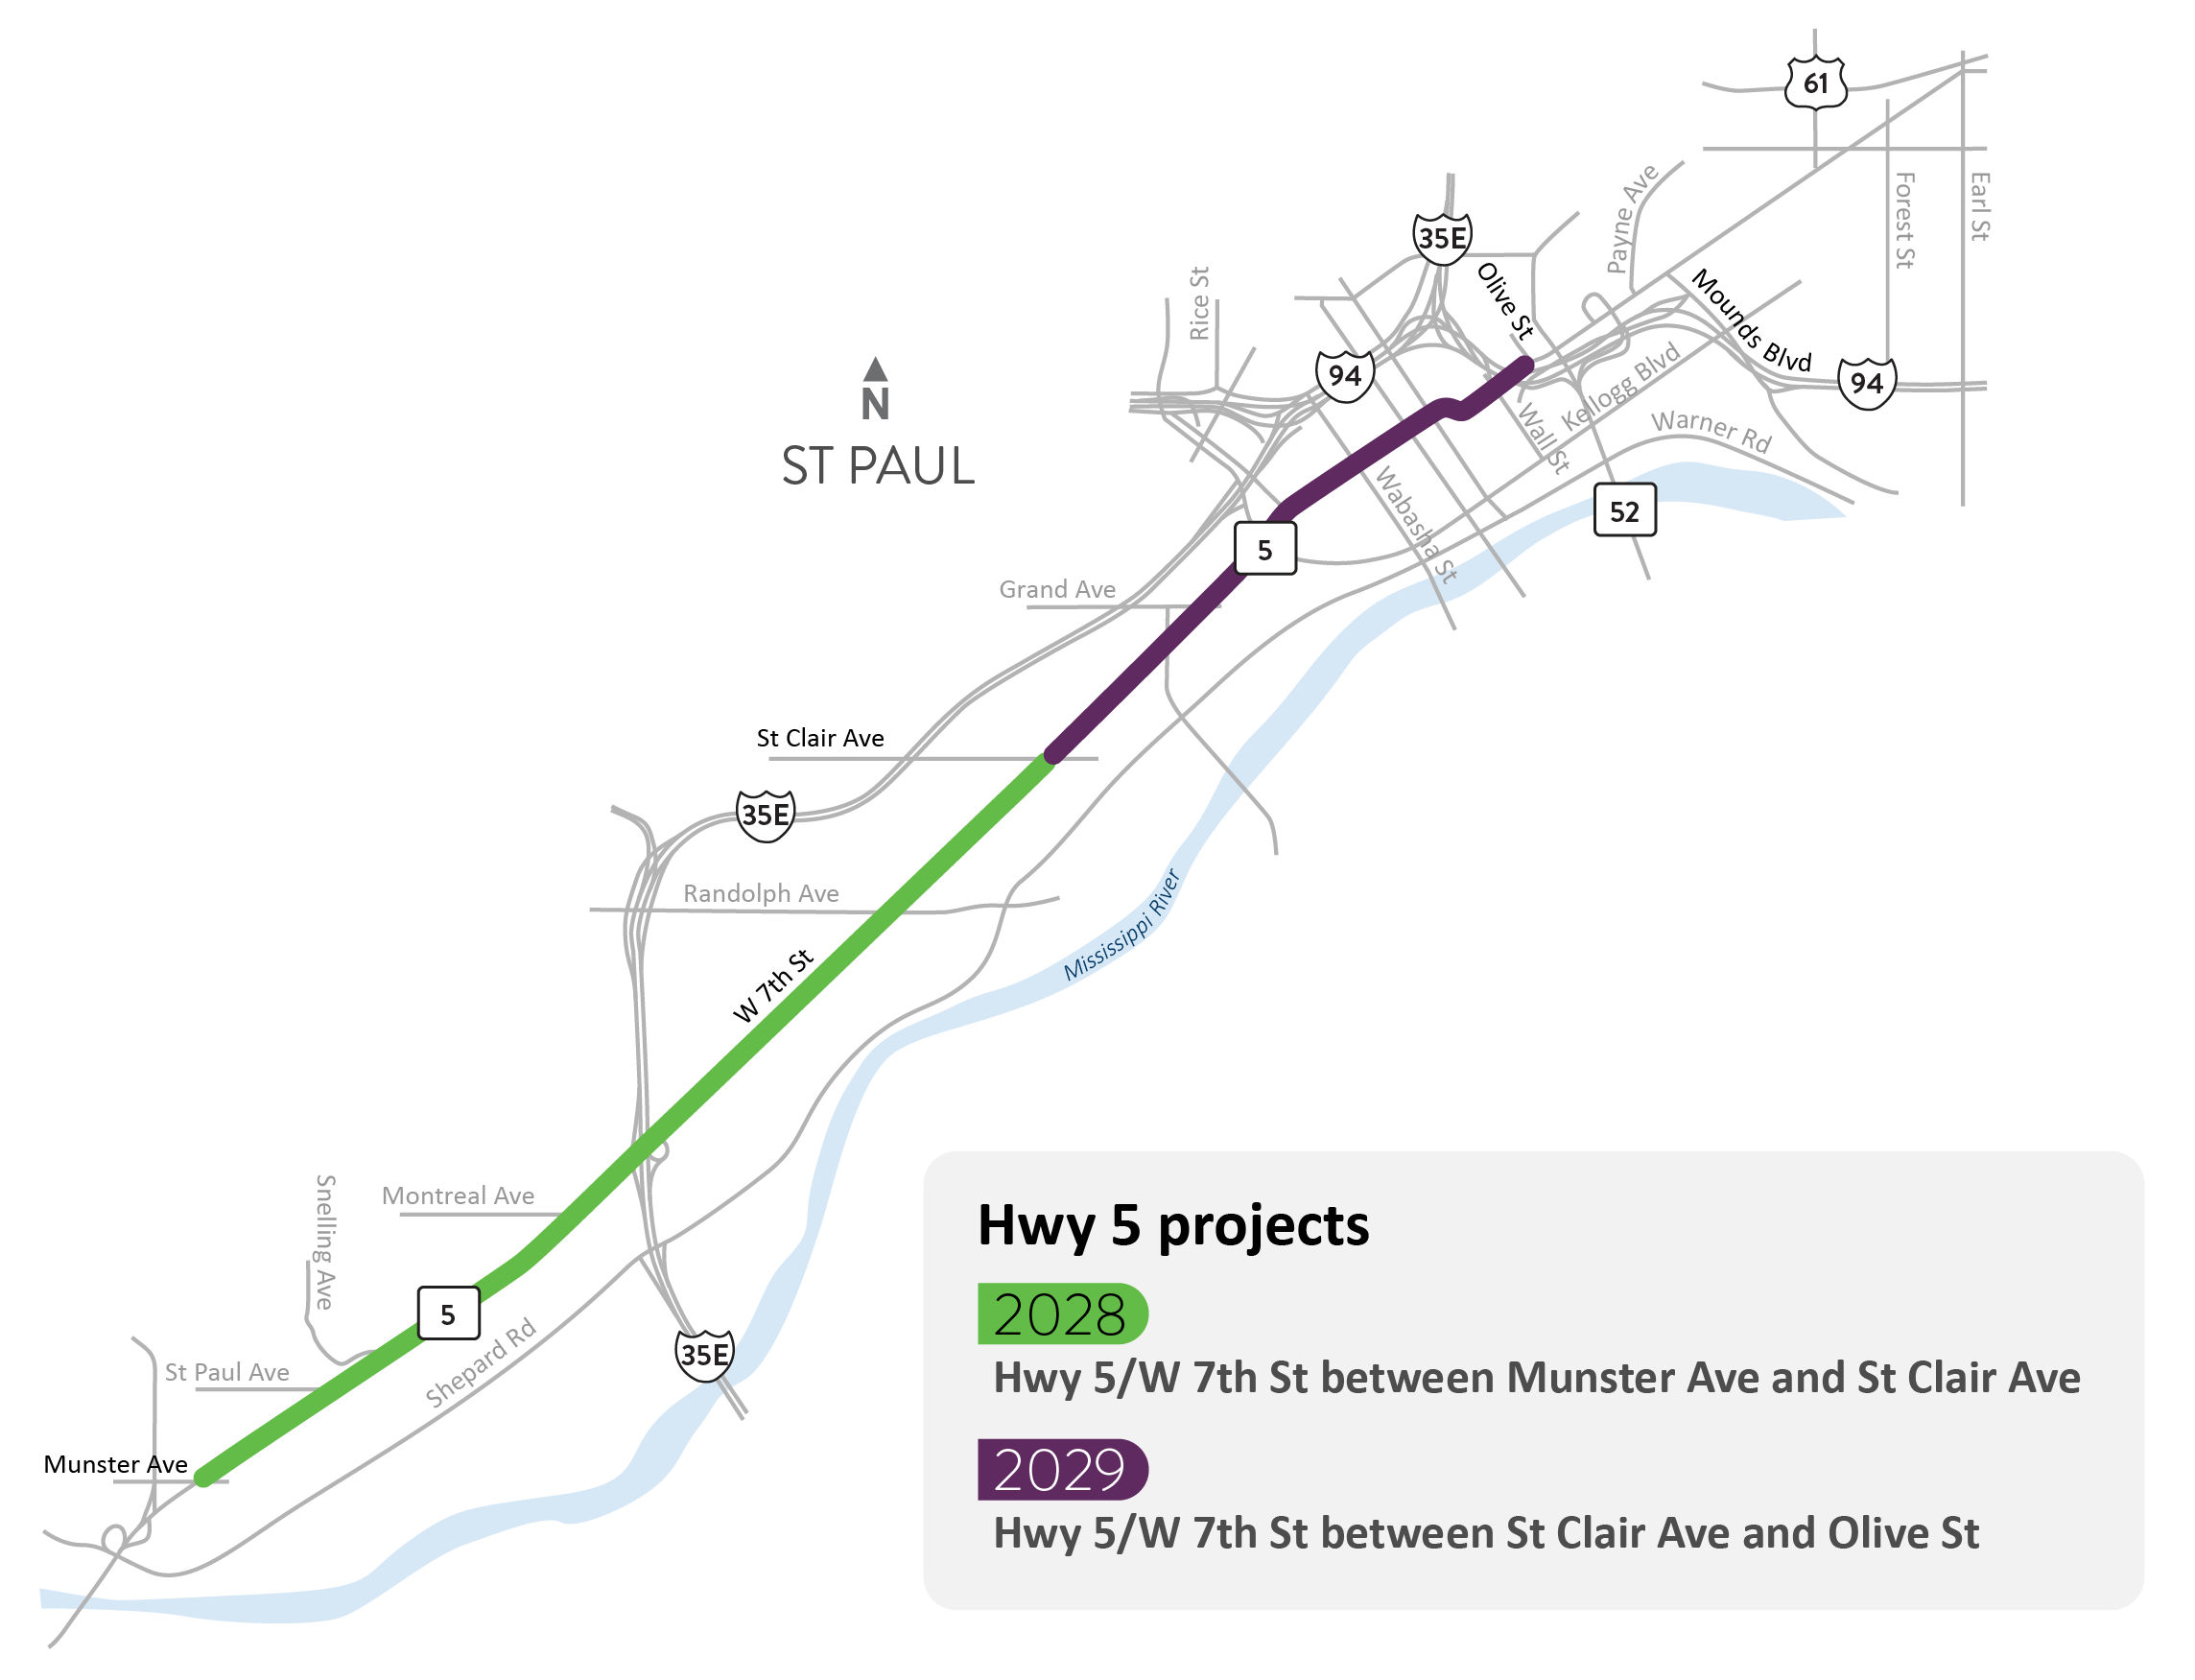 Highway 5/West 7th Street between Munster Avenue and Saint Clair Avenue in St. Paul project location map